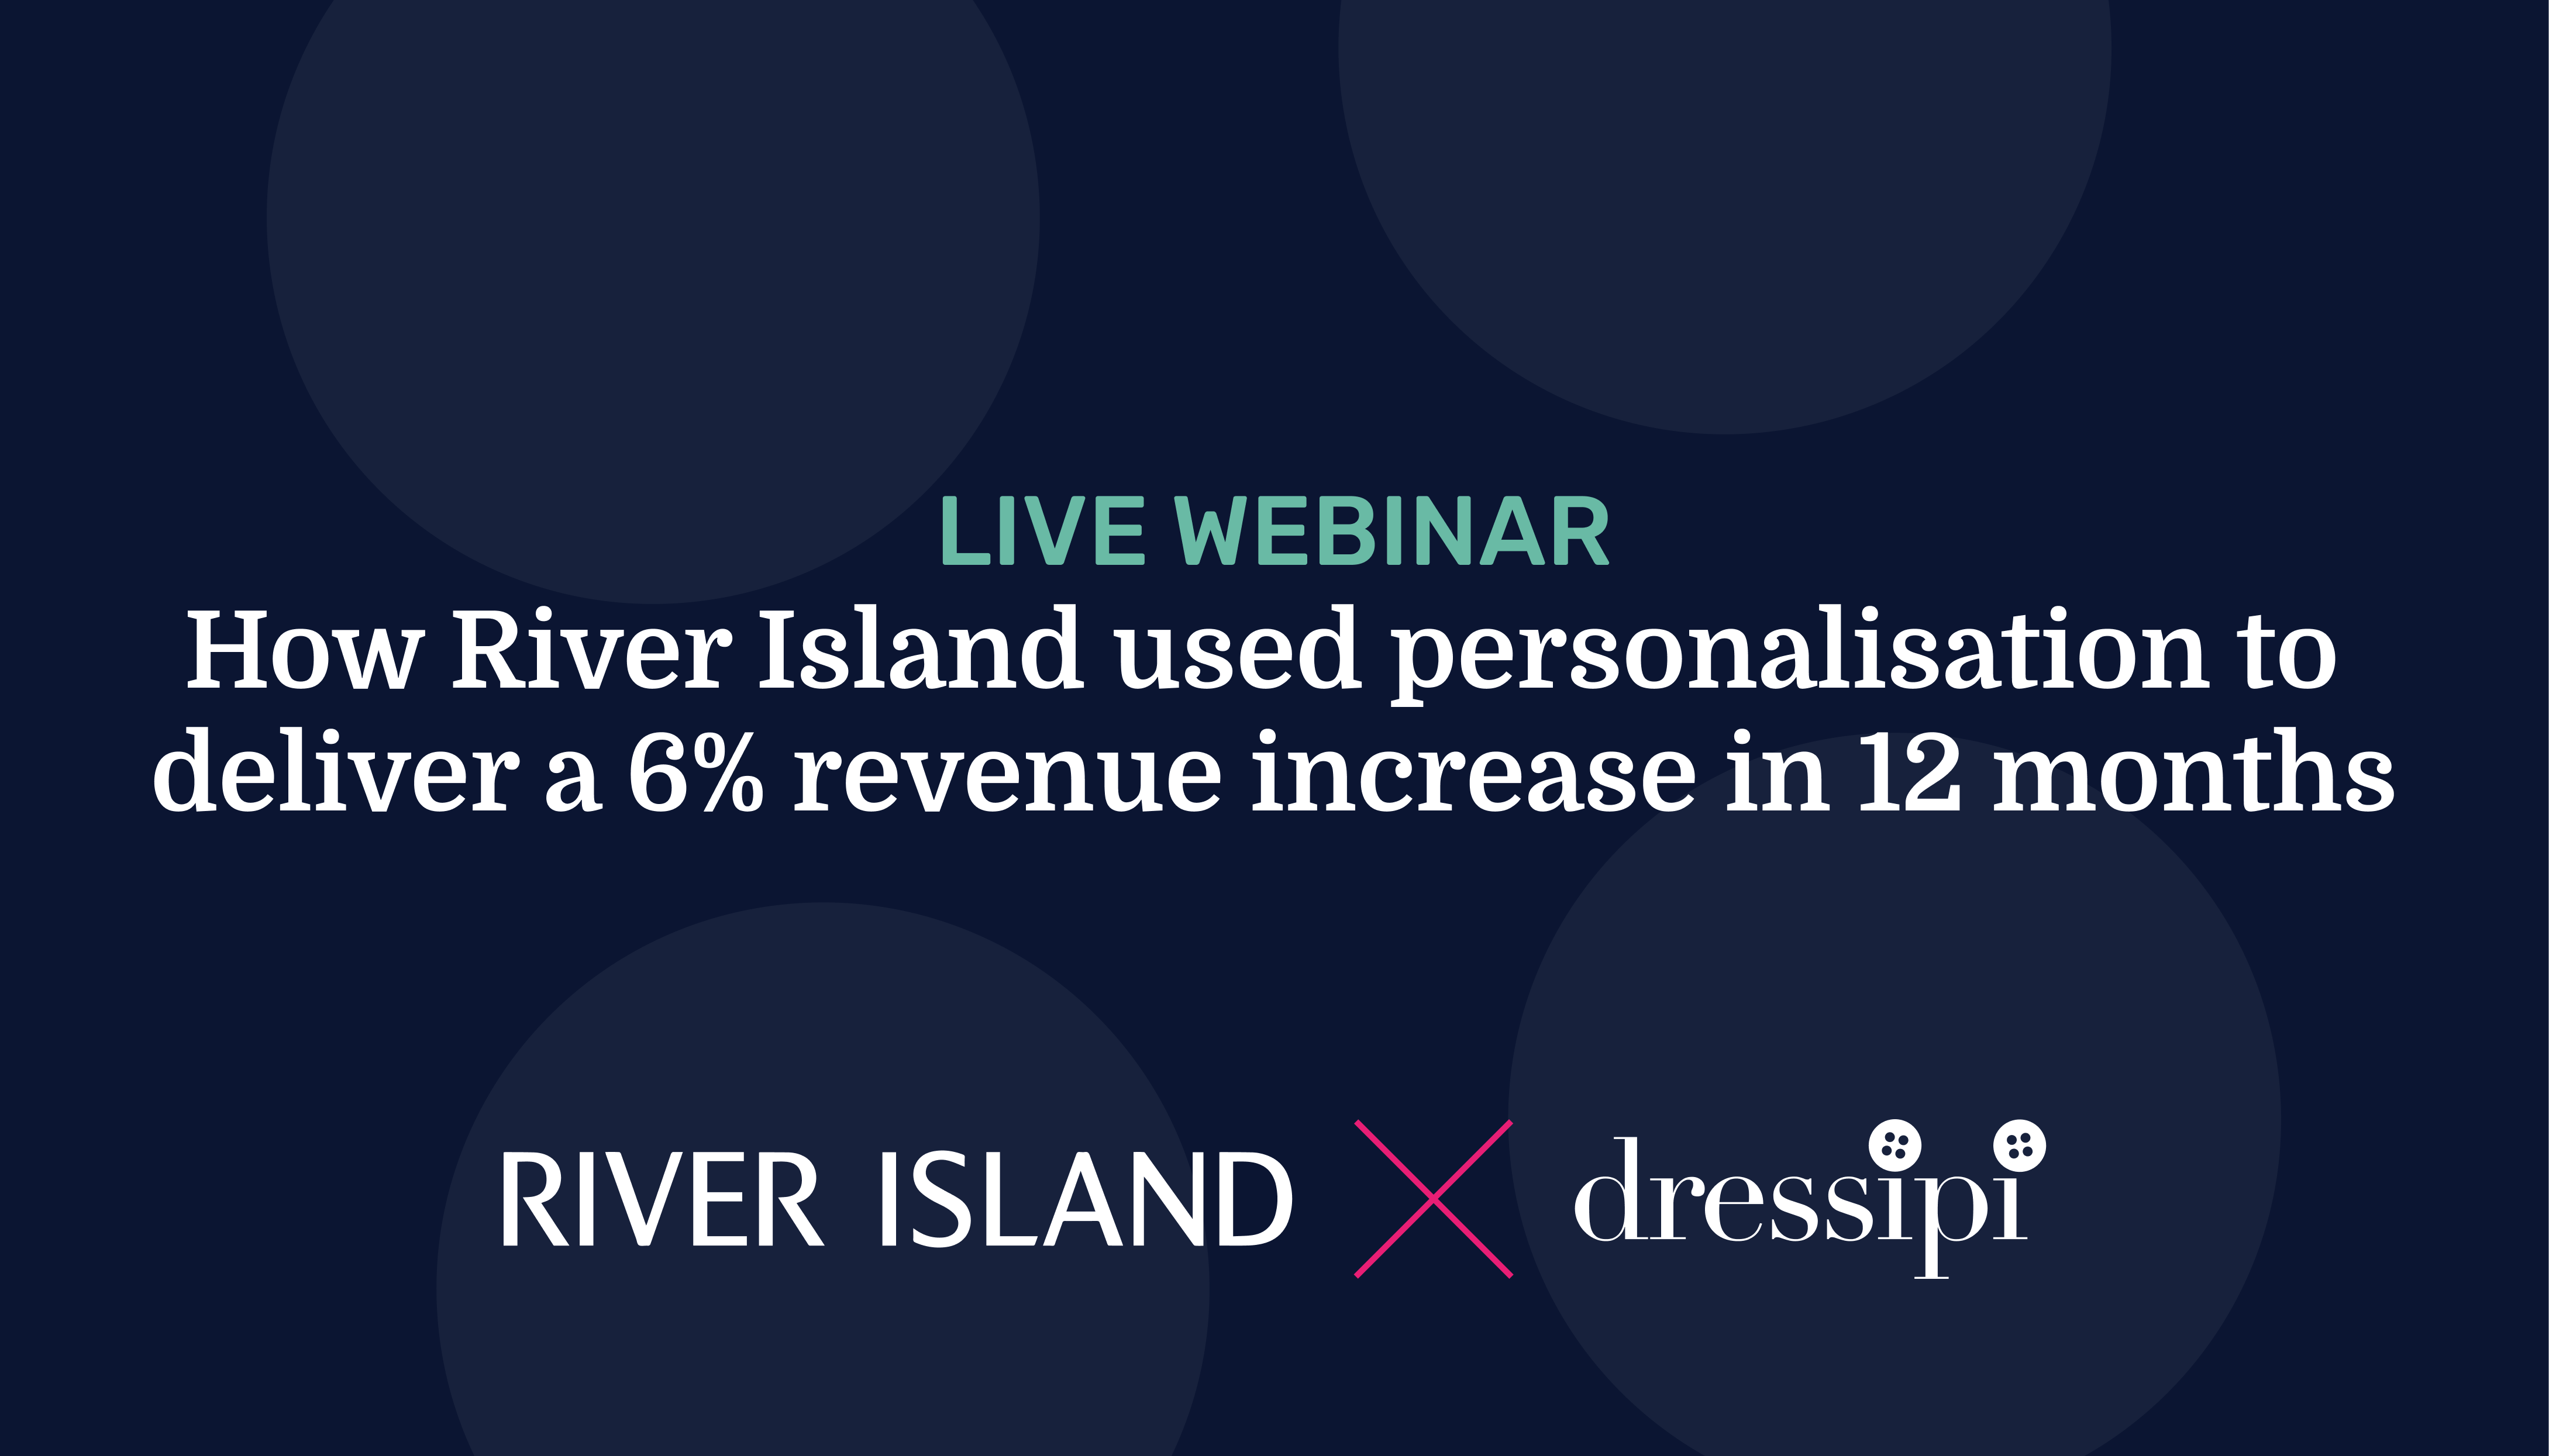 Webinar: How River Island Used Personalization to Deliver a 6% Revenue Increase